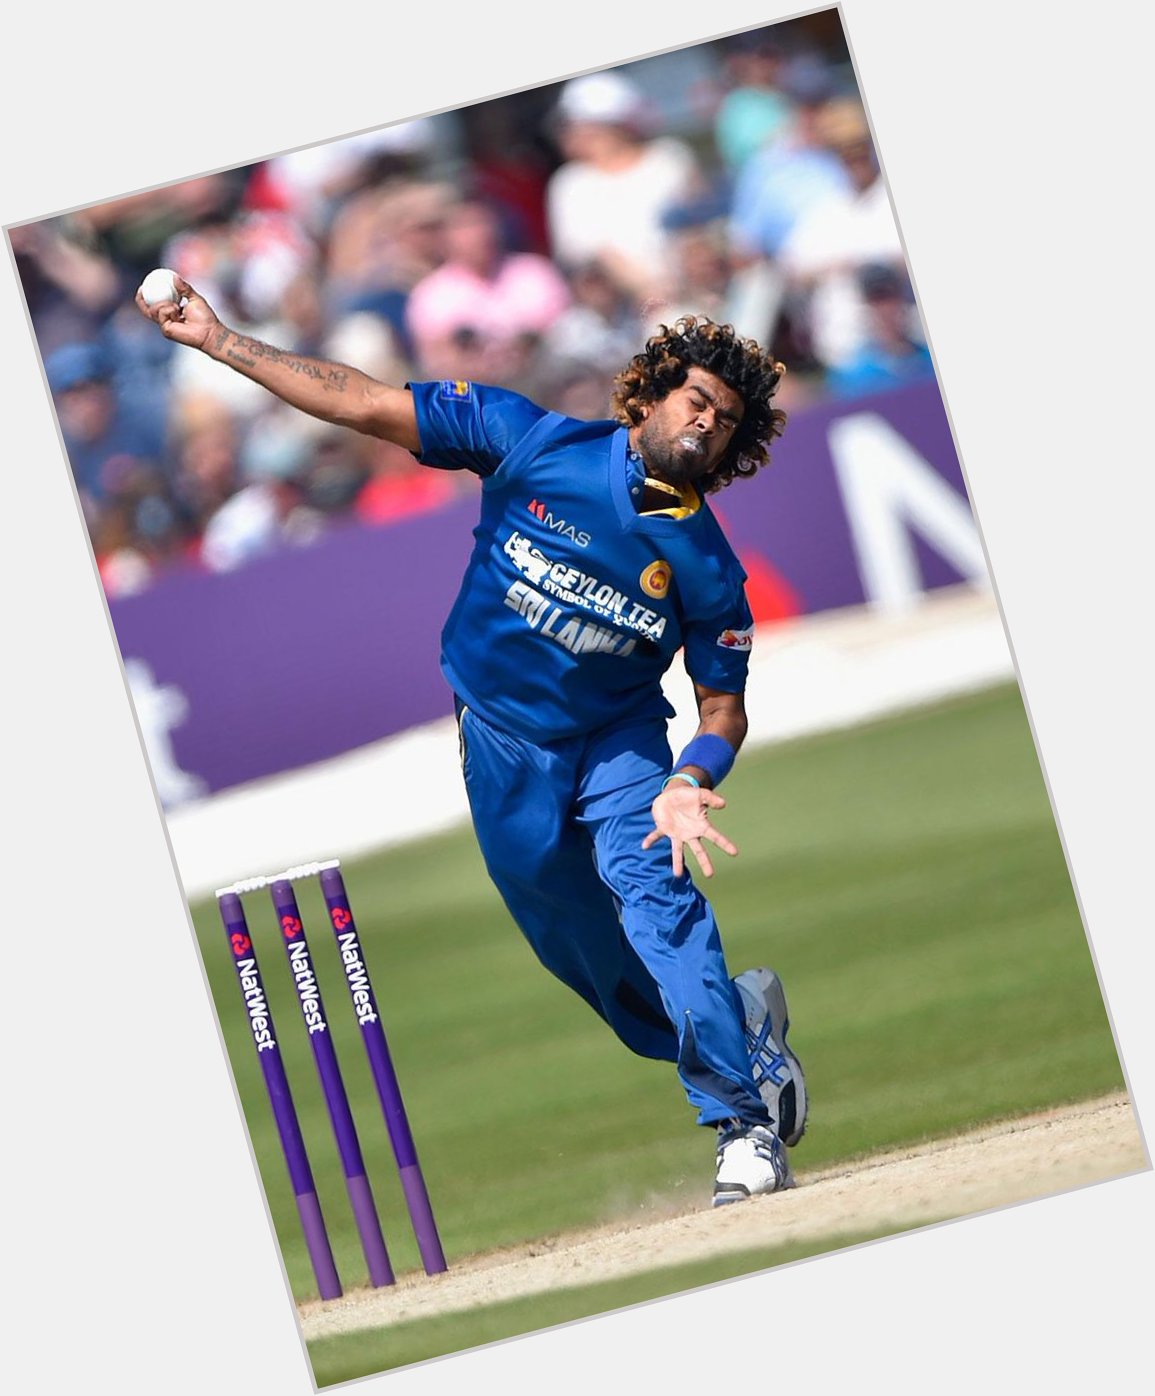 Happy birthday to the King of Sling - Lasith Malinga !
The only bowler to have 3 hat-tricks in ODIs. 